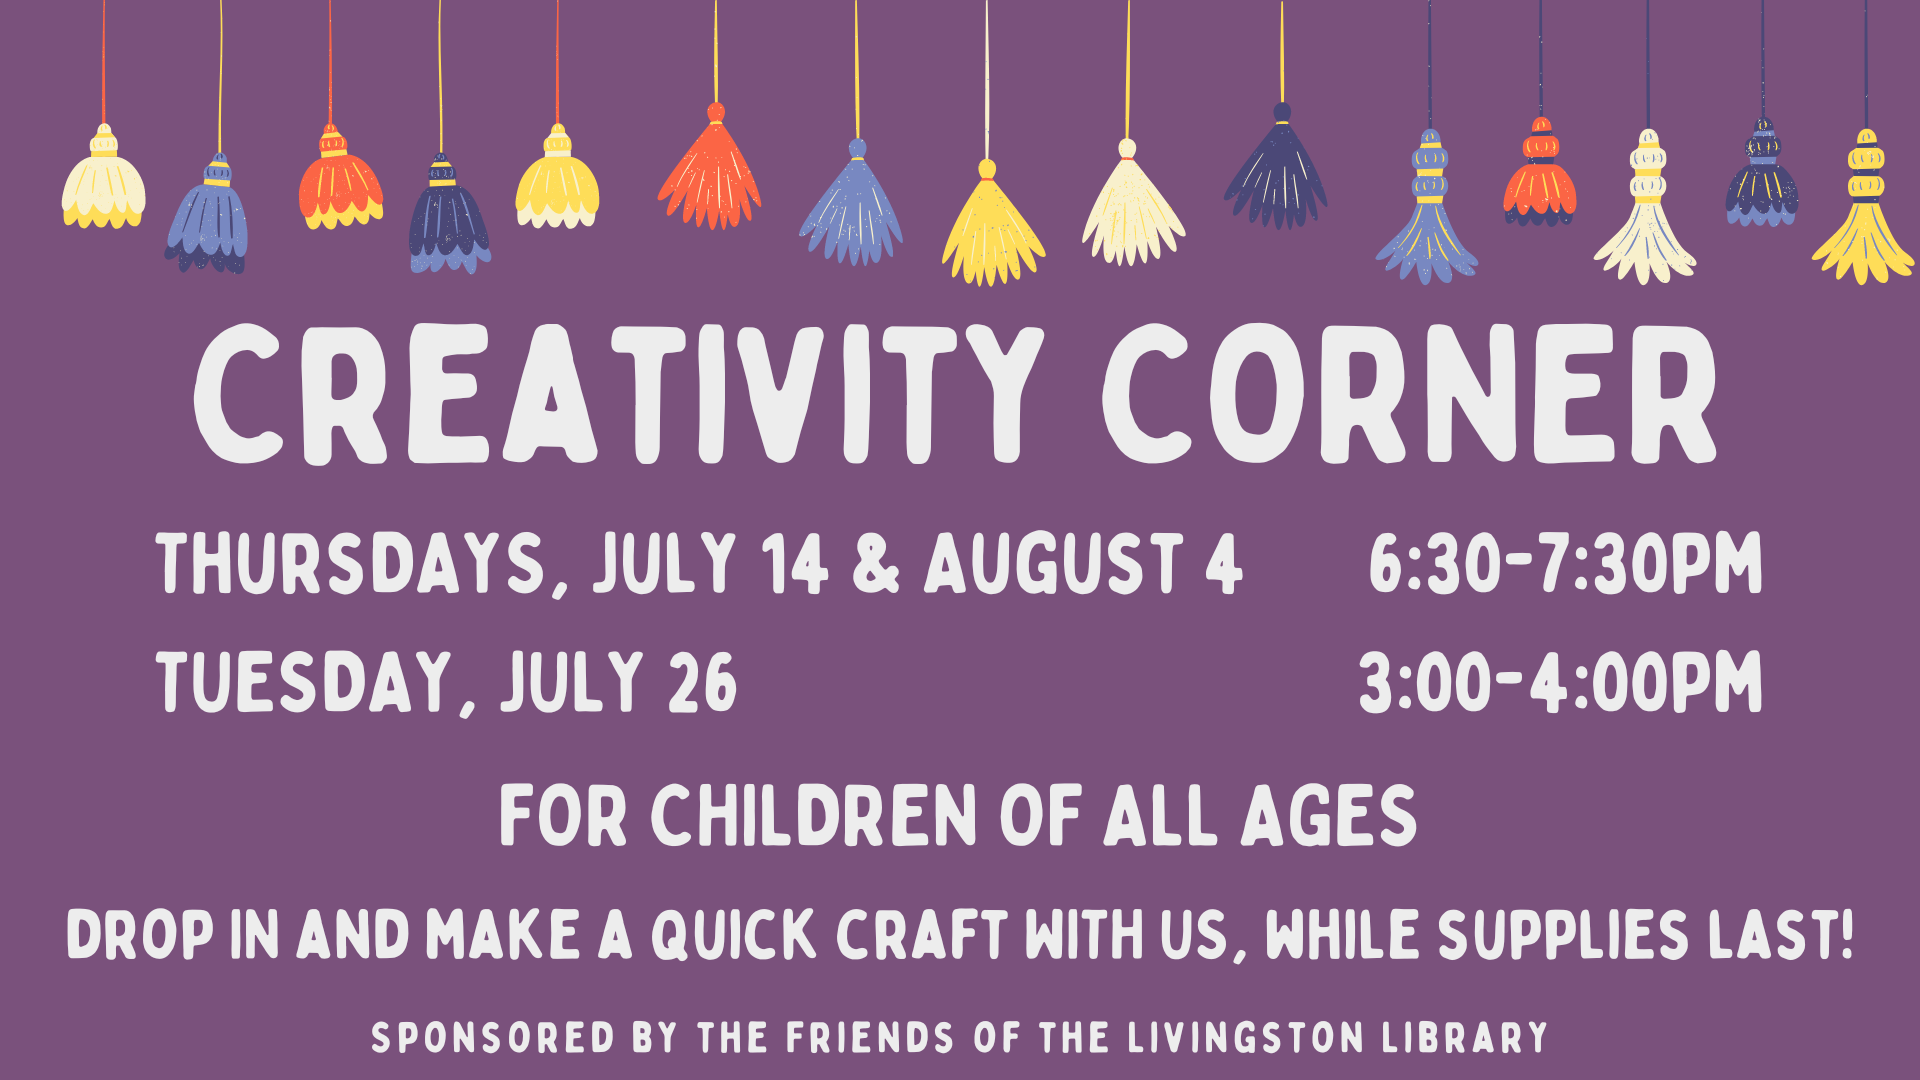 creativity corner in white text on a purple background with colorful tassels along the top edge